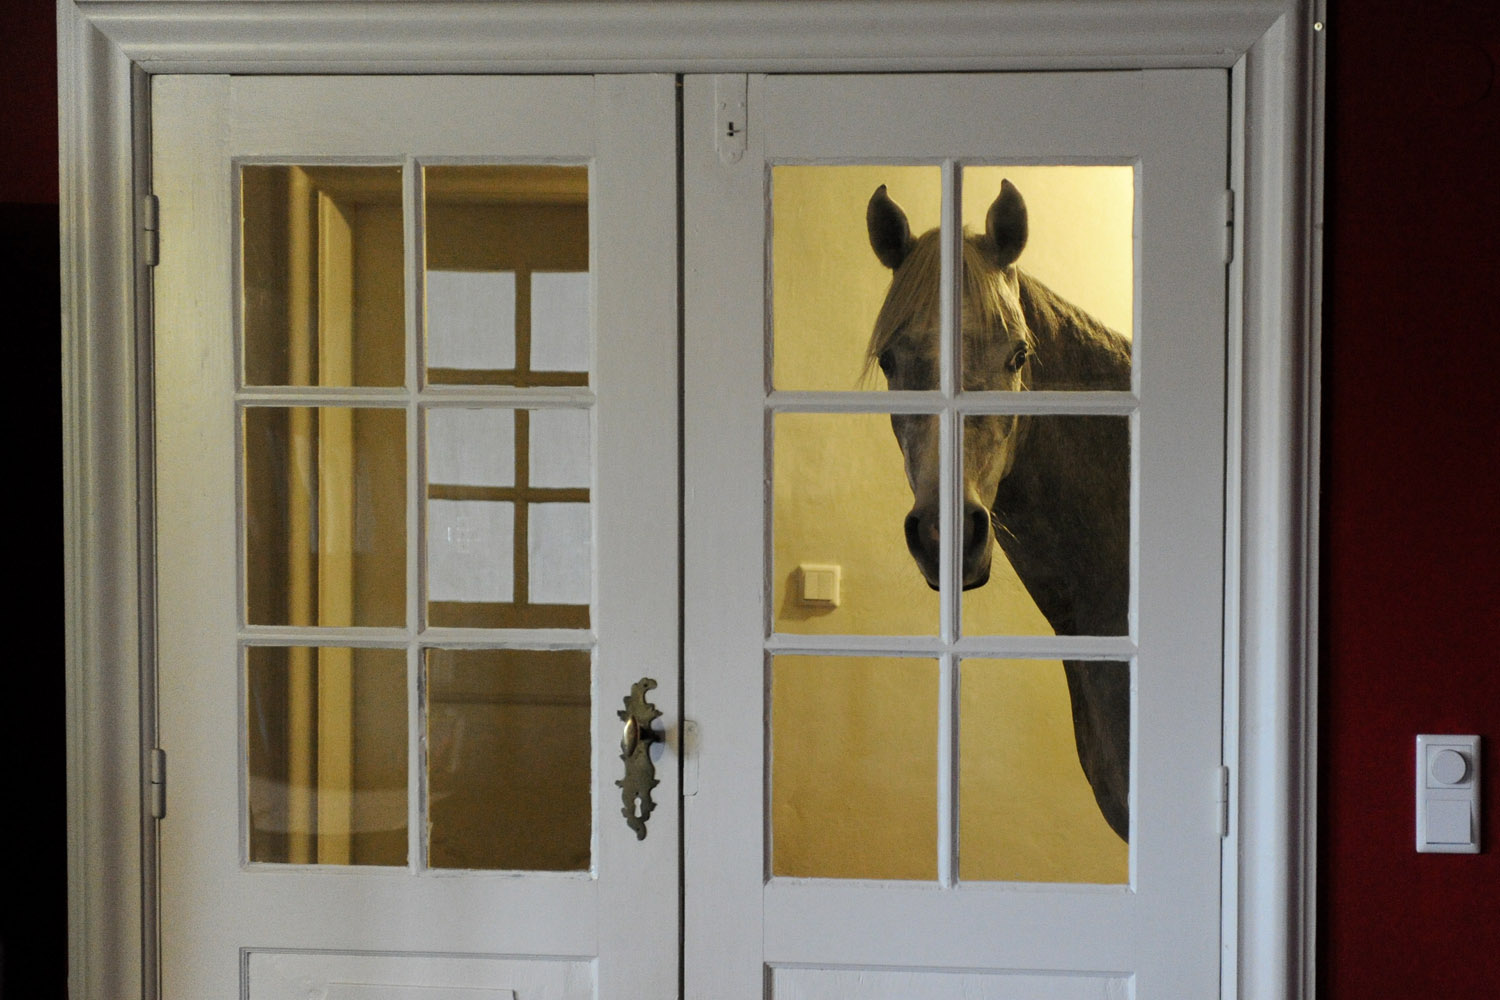 Feb. 10, 2014. Three-year-old Arabian horse Nasar stands in front of the living room door, Holt, Schleswig-Holstein, Germany.